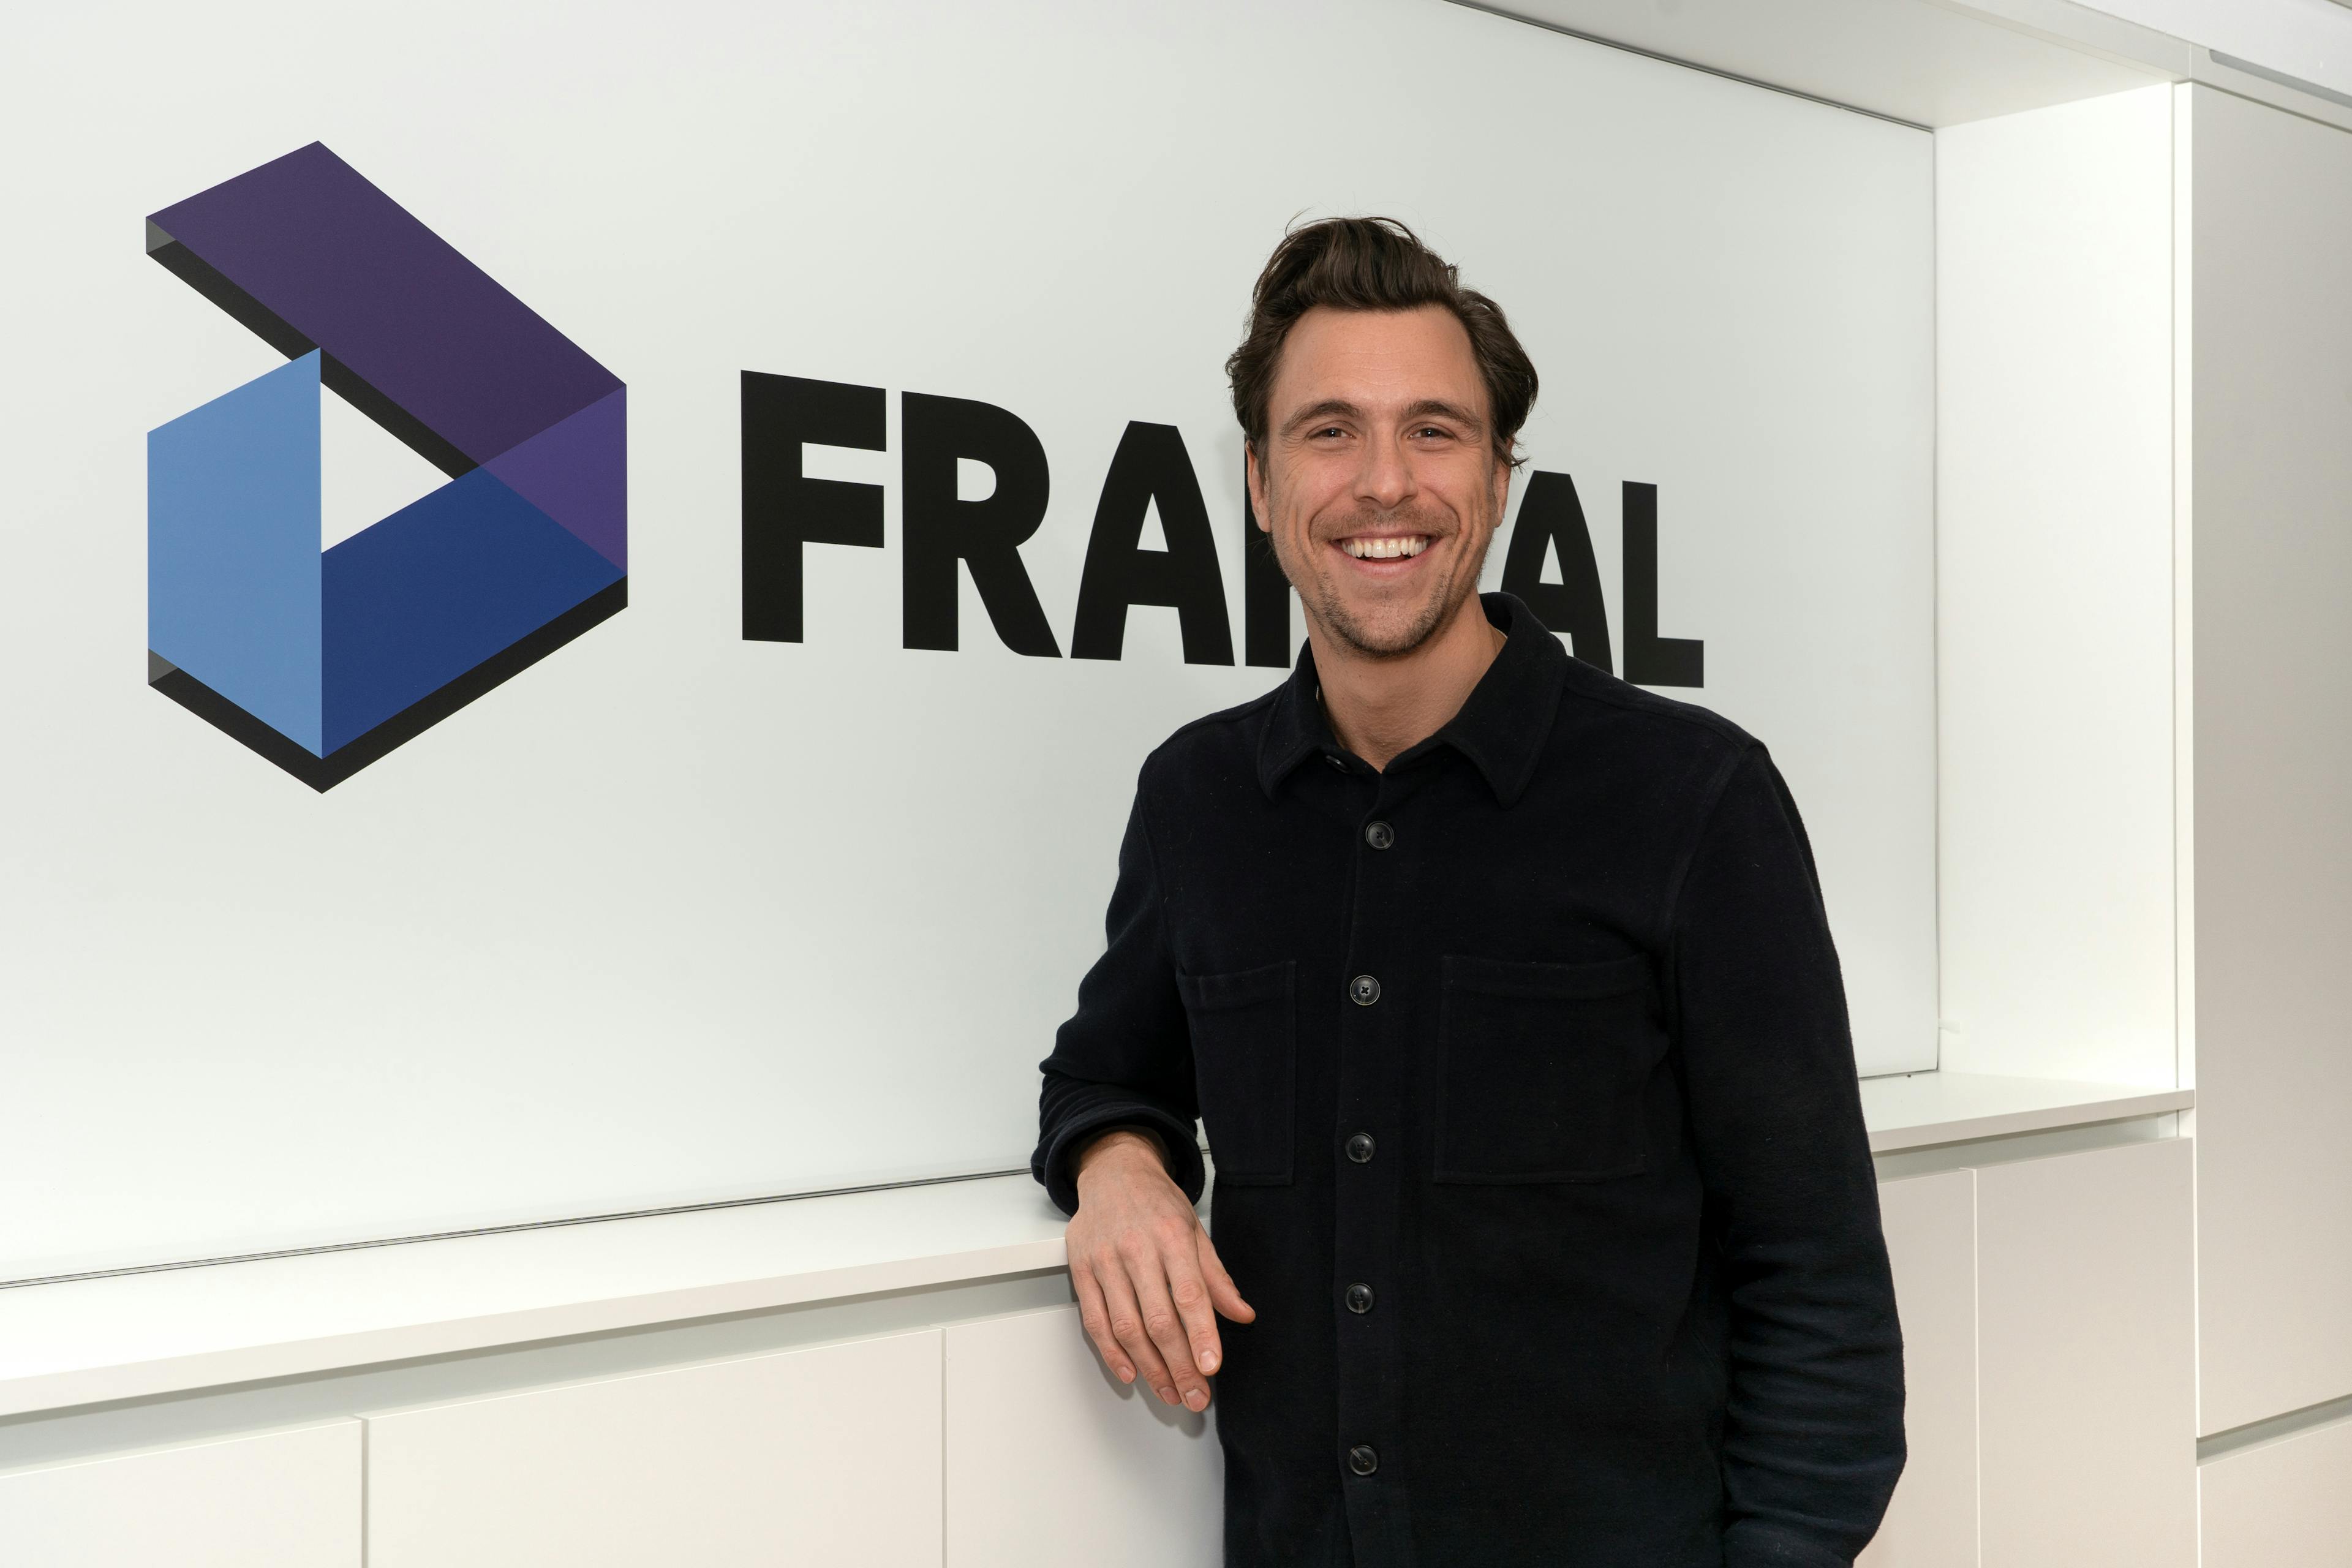 Kilian v. Dallwitz, the Press Spokesperson for Fraktal Development, presents a cheerful demeanor with a broad smile. He's dressed in a casual yet smart dark shirt, lending an approachable yet professional image. The 'FRAKTAL' logo looms prominently in the background, signifying the brand's strong presence.